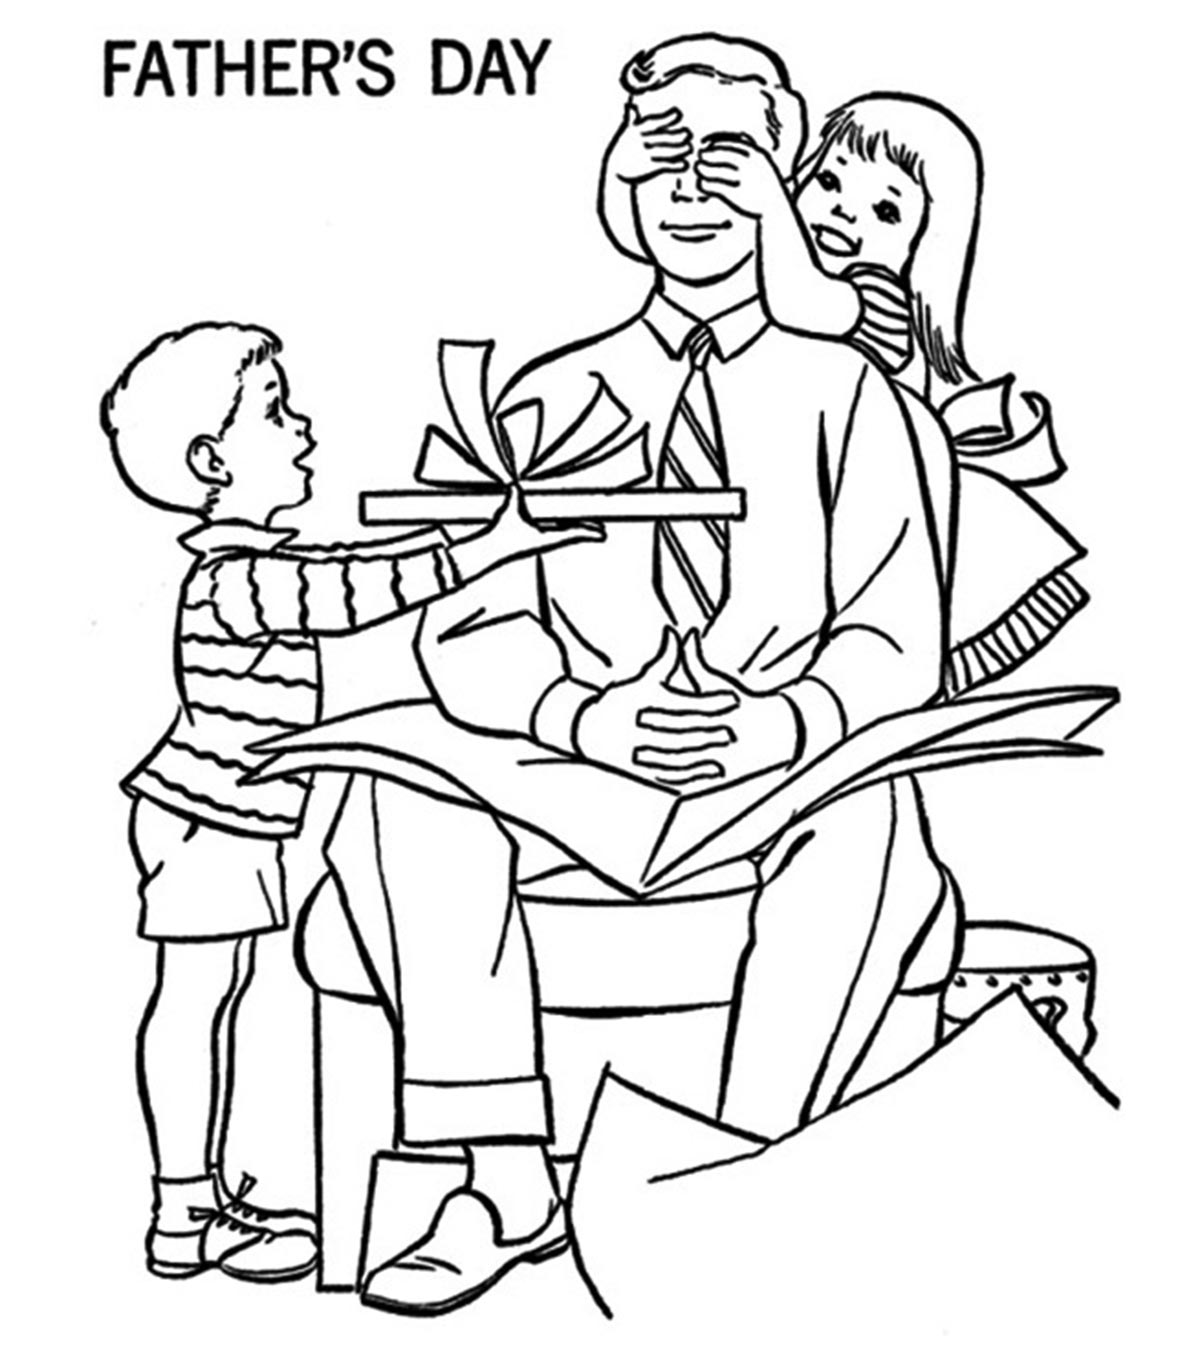 Top 20 Father's Day Coloring Pages For Toddlers